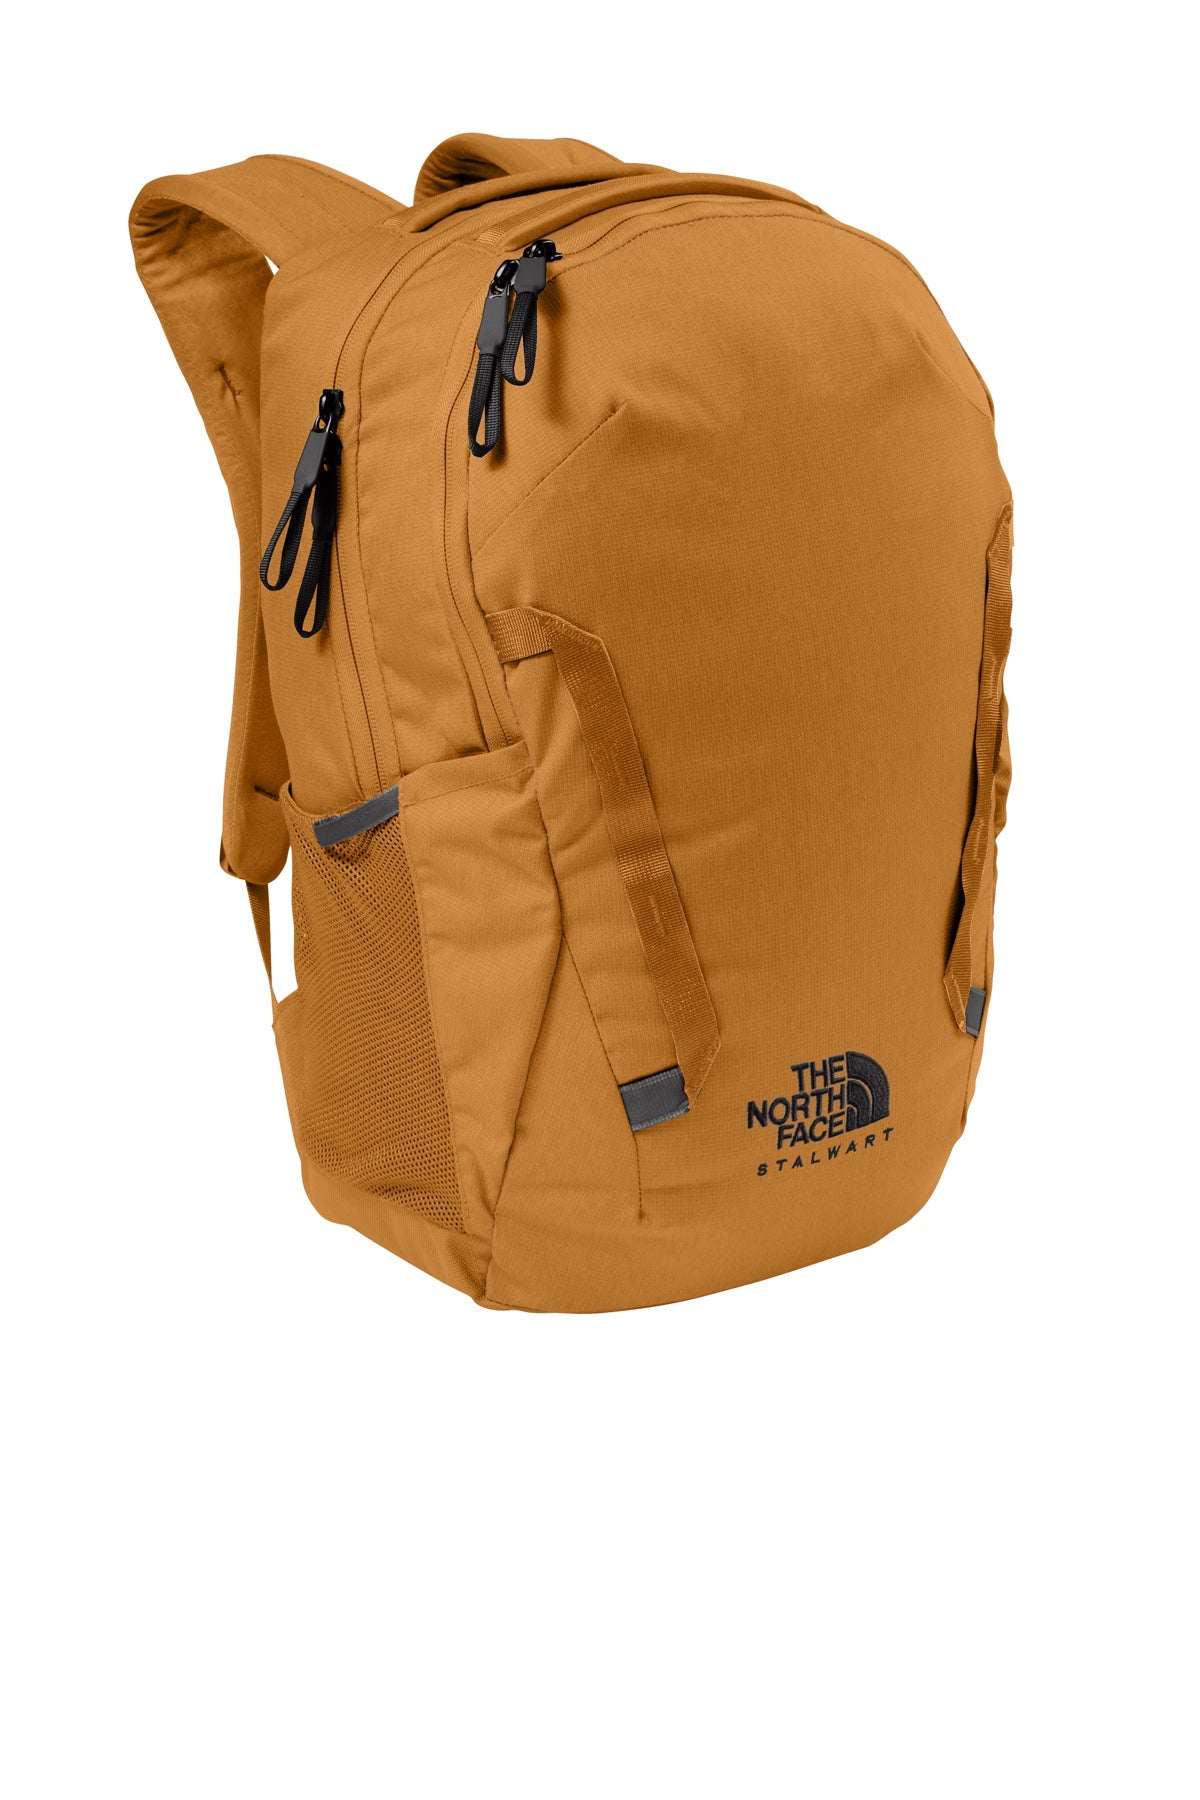 The North Face Stalwart Backpack Timber Tan